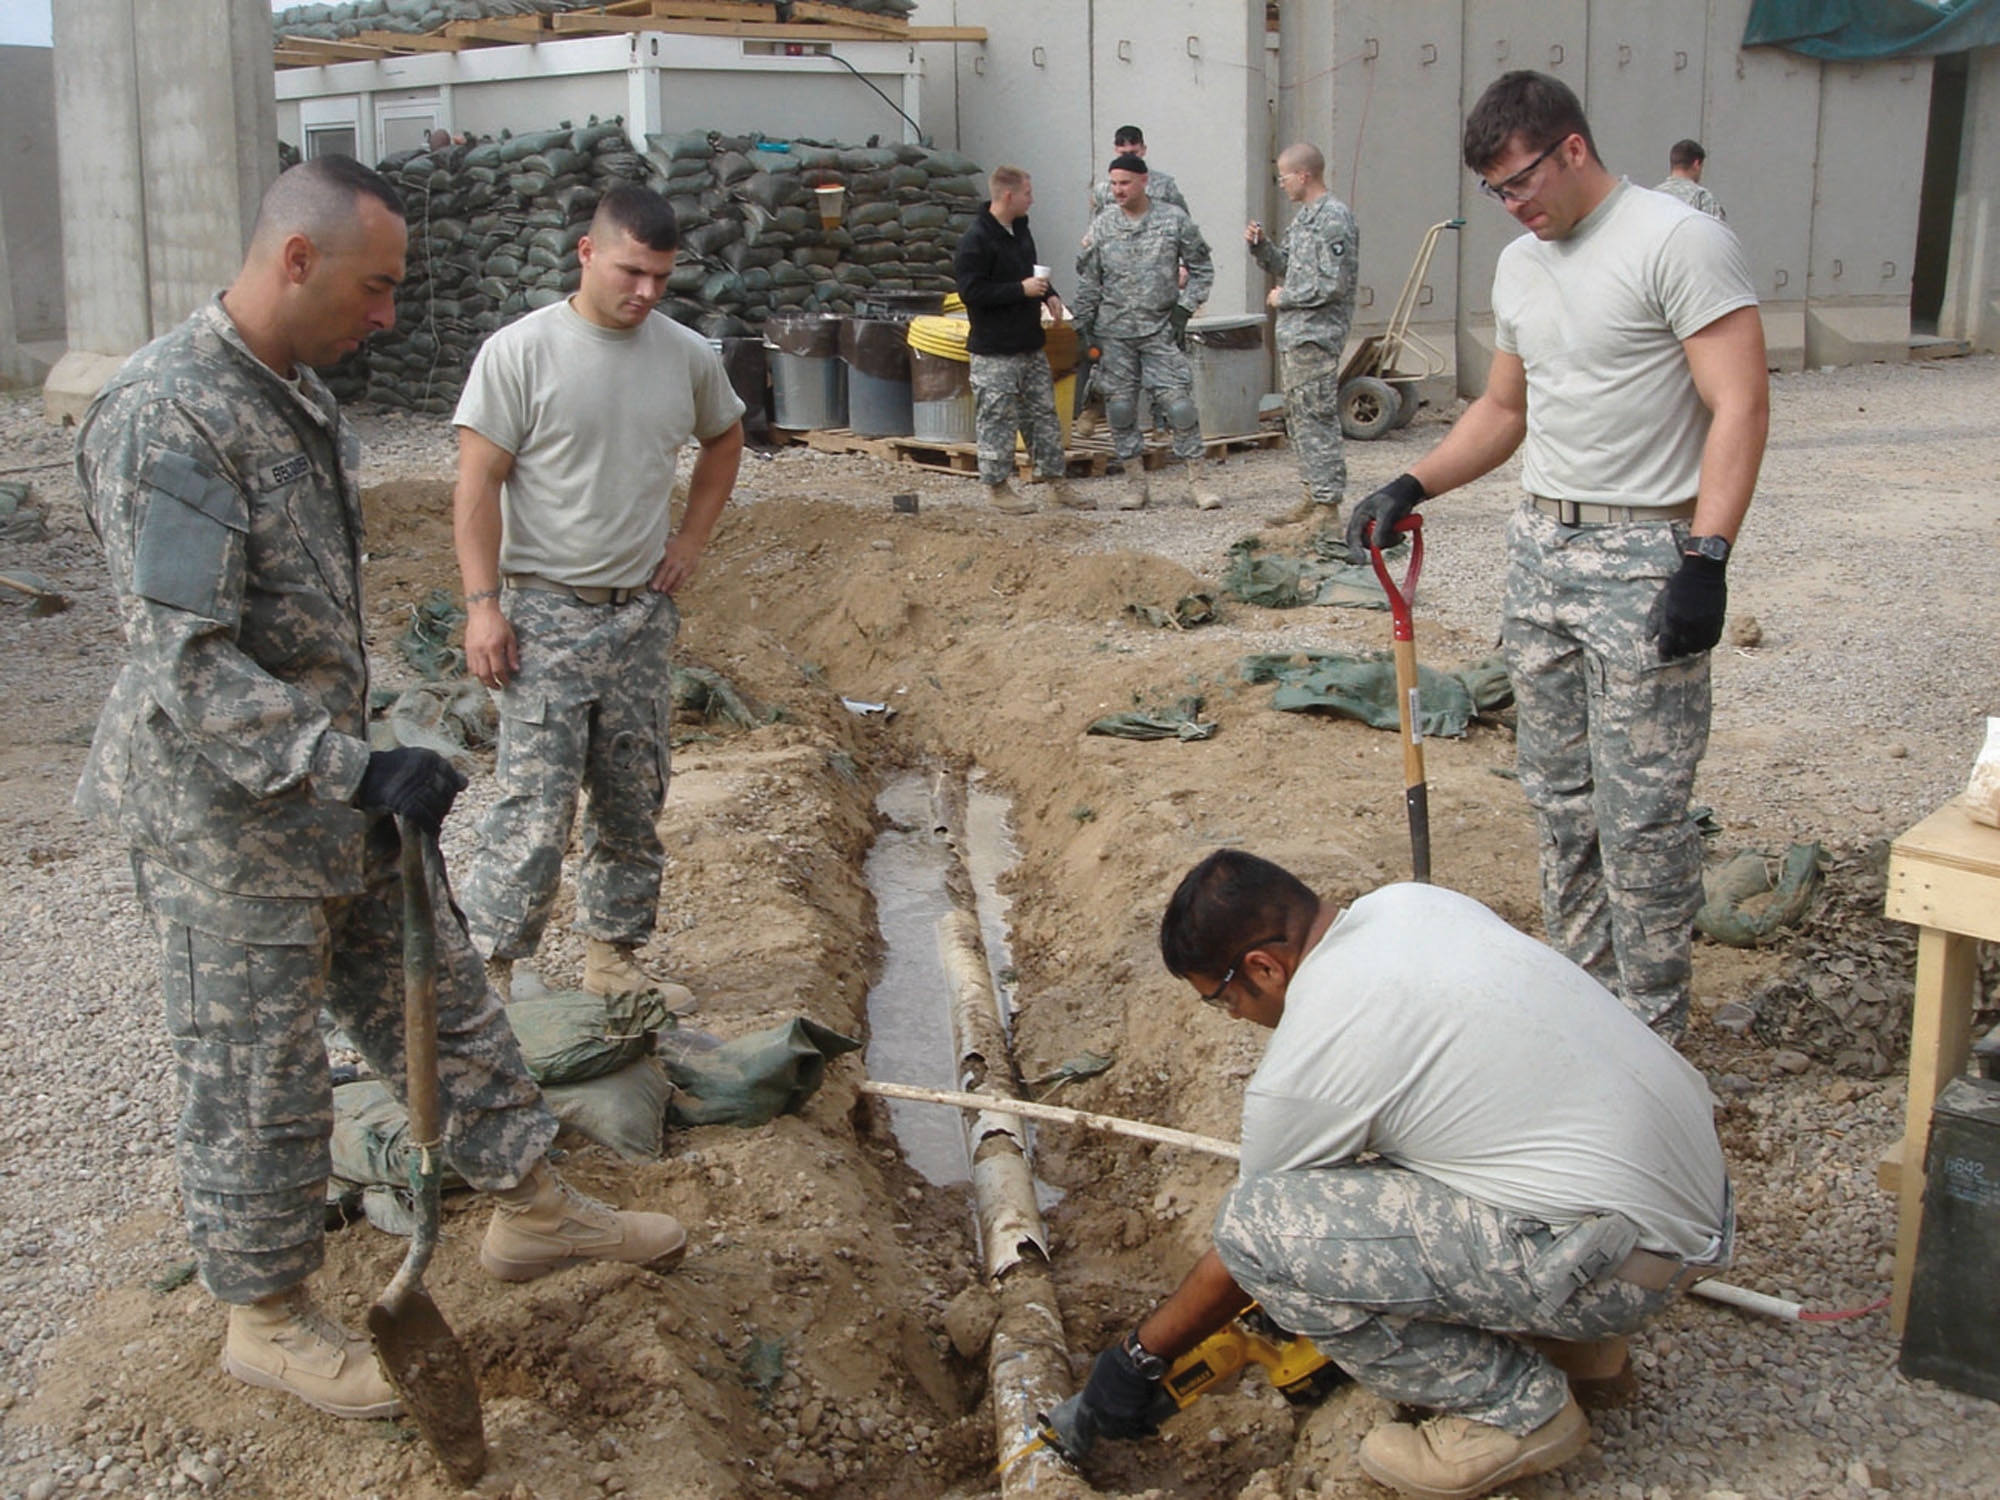 (From left) Tech. Sgt. John Becquer, Airman 1st Class Matthew Giacona and Staff Sgt. Caleb Dennis, all from the 732nd Expeditionary Civil Engineer Squadron Detachment 6, watch as Staff Sgt. Pranay Singh, a utilities craftsman also with Det. 6, cuts through a drain pipe. The pipe will carry  water to the showers, clothes washers and kitchen at Patrol Base Olson, Iraq. The Airmen are assigned to the 18th Civil Engineer Squadron here. (U.S. Air Force photo)
